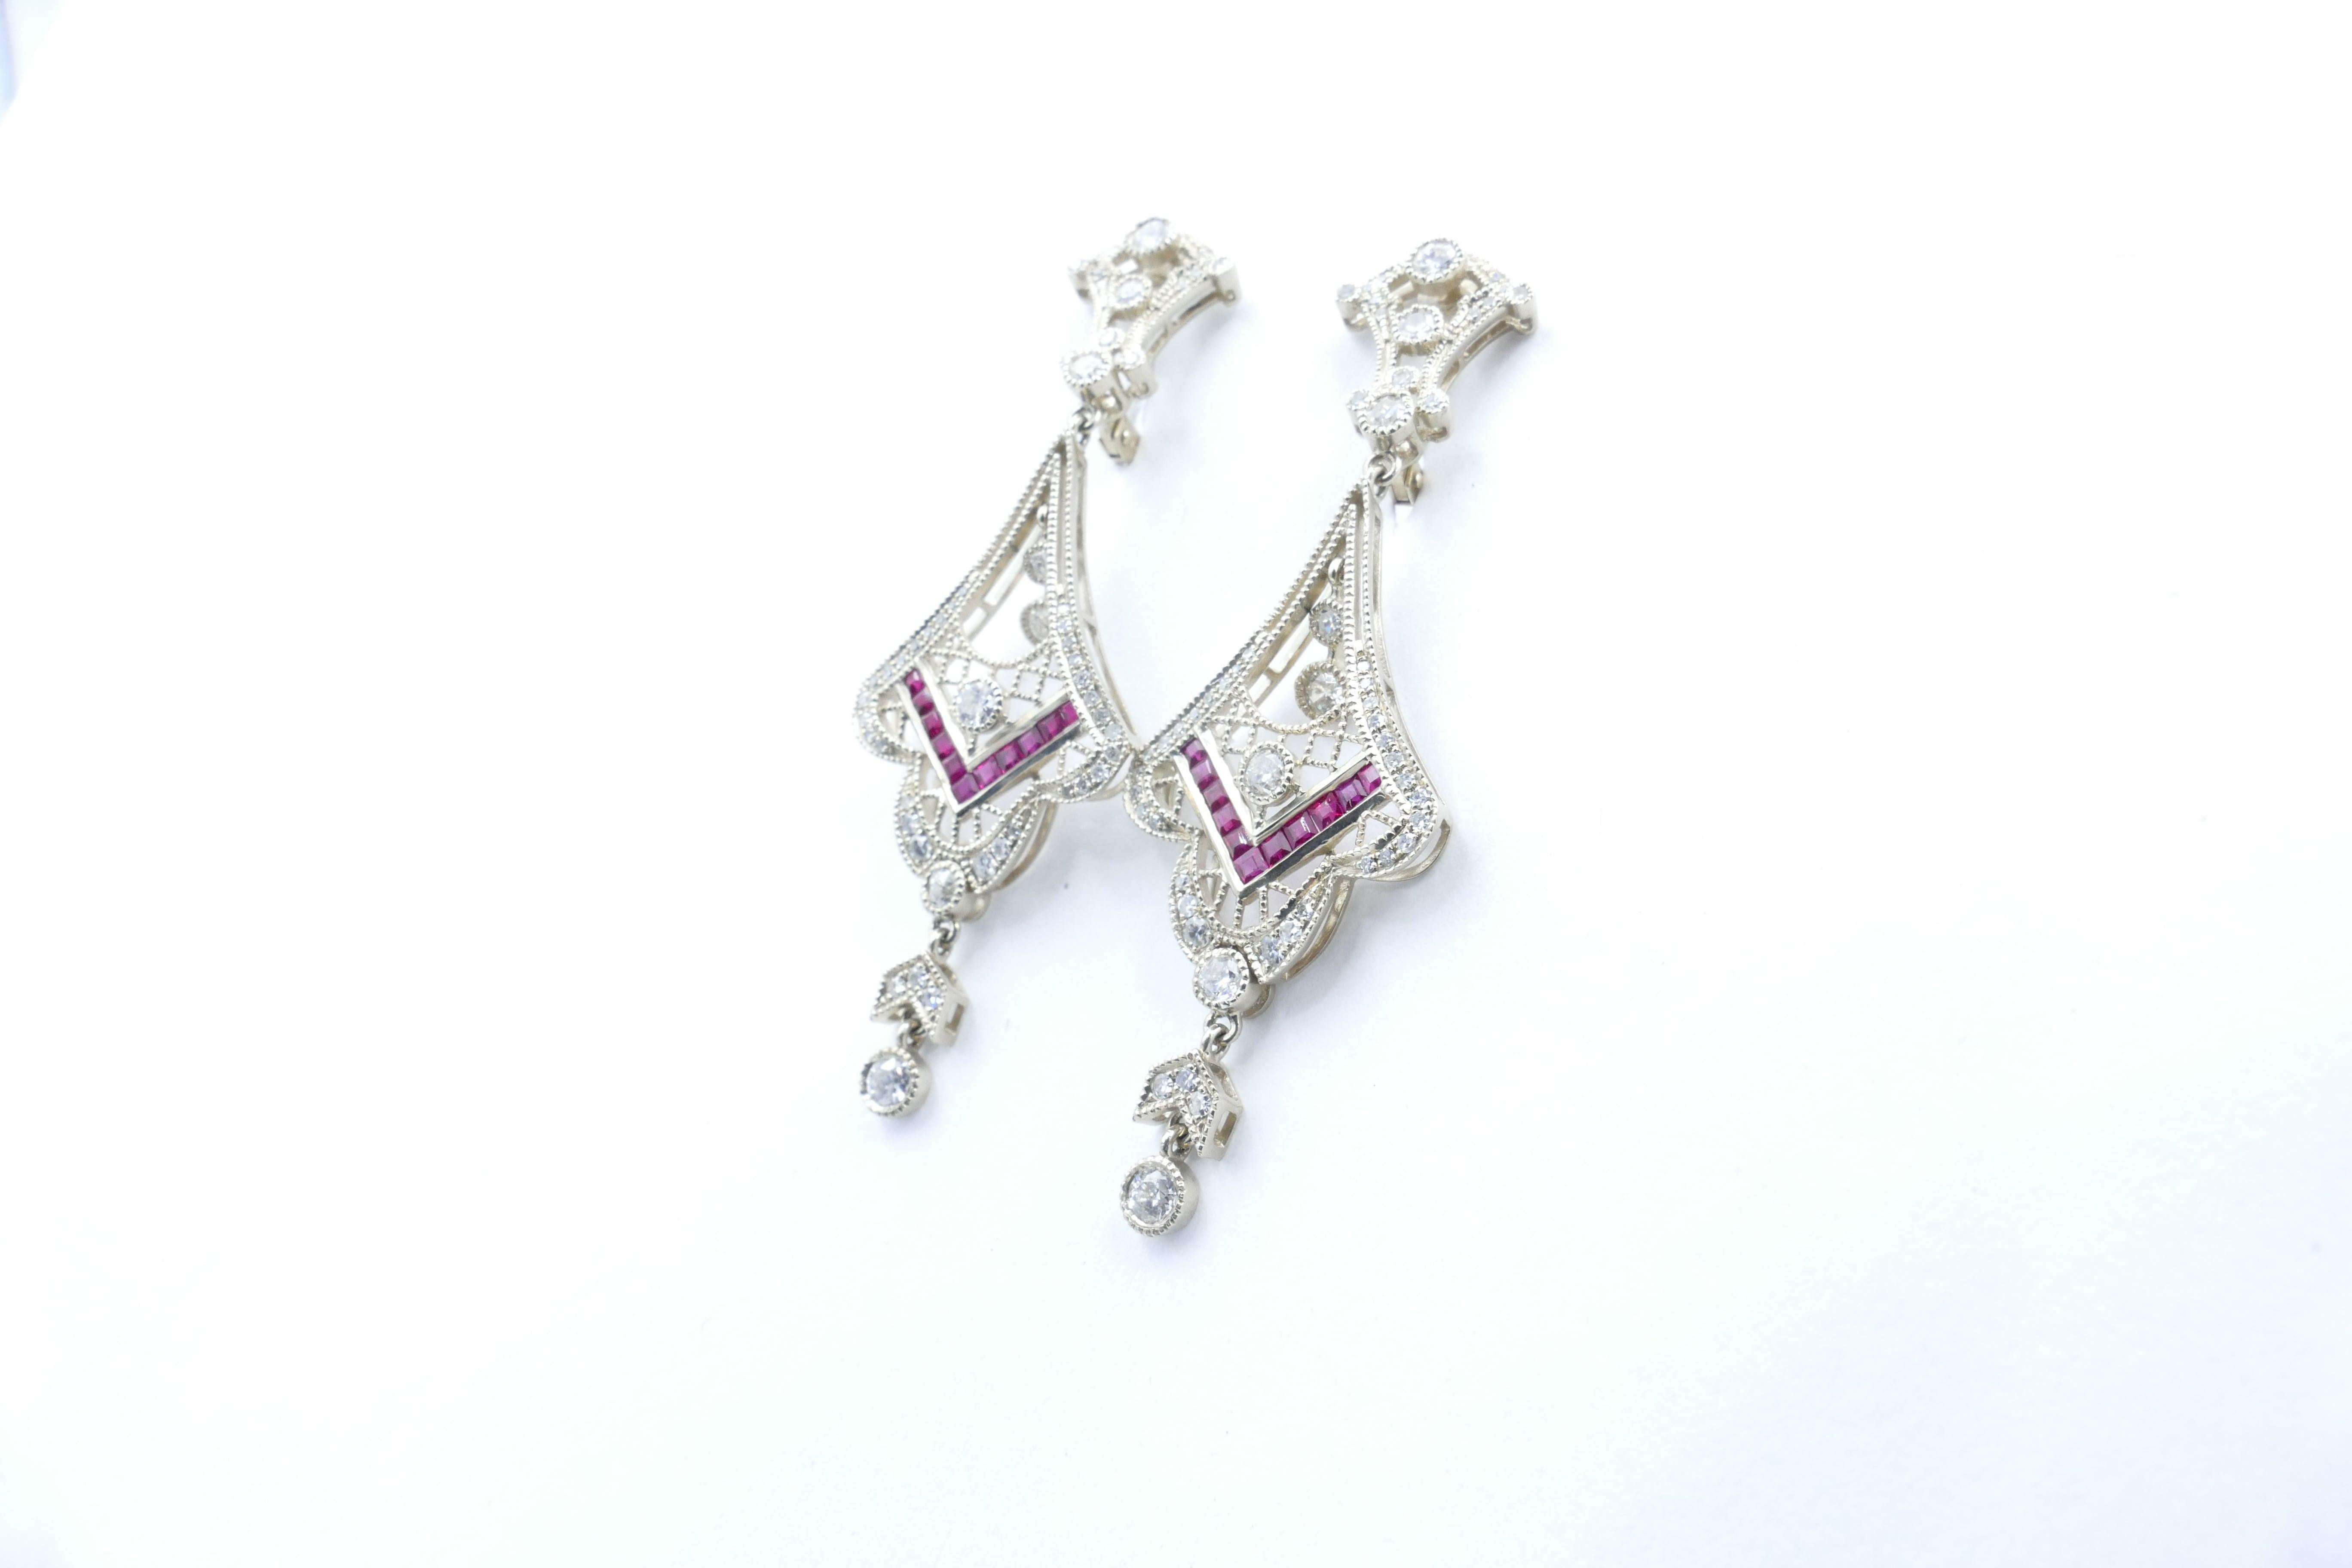 There are a massive 108 Diamonds in these gorgeous modern Drop Earrings.
The Colour is H/I with Clarity SI1-I1, grain/bezel set with millegrain detail.
In the Centre are 22 Rubies of purplish-red, eye-clean clarity, French carre cut, channel set.
A